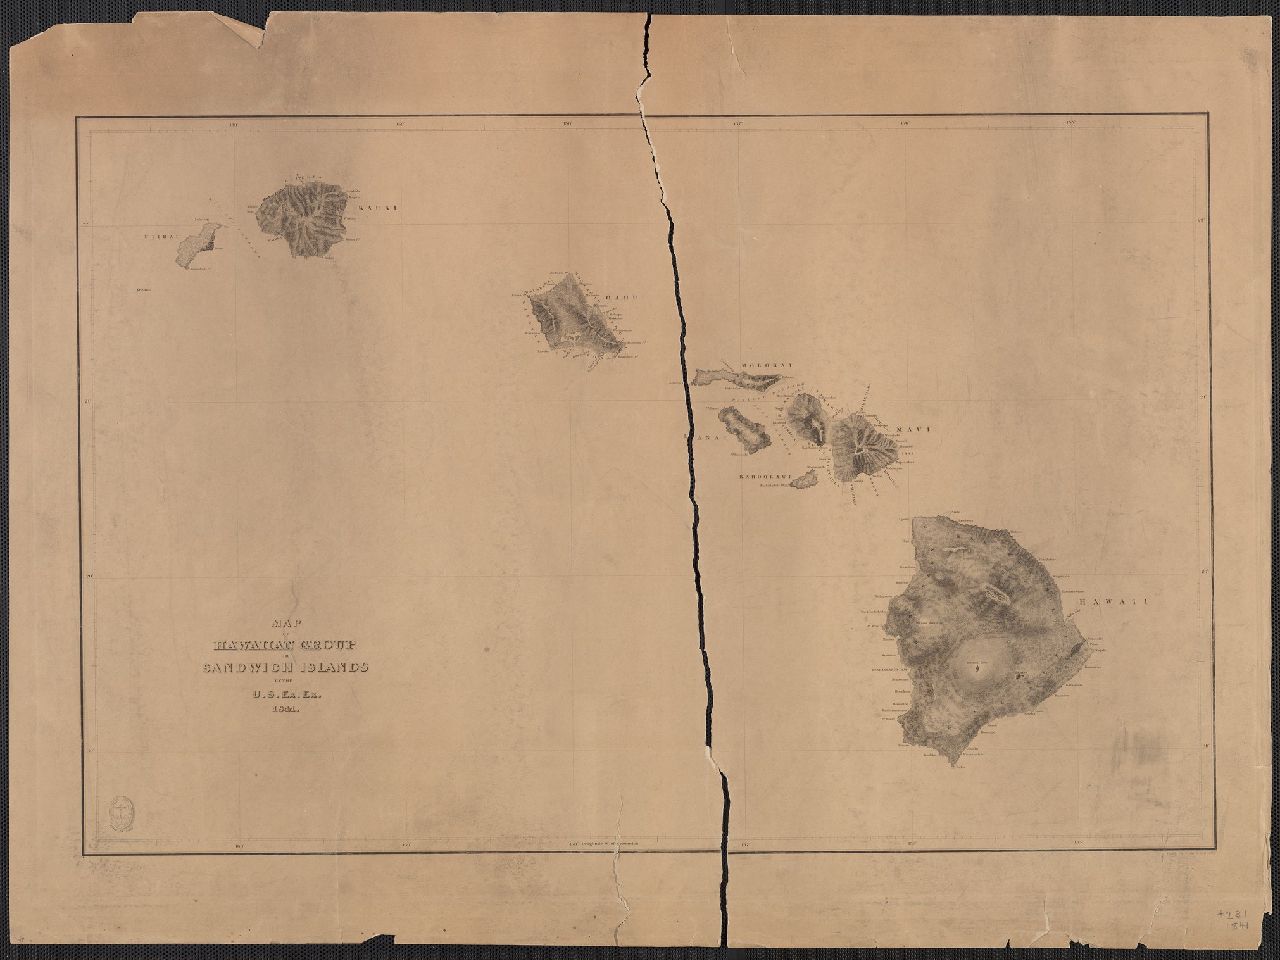 1841 Map of Hawaiian Group or Sandwich Islands by the U.S. Ex.Ex. 1841. Engraved by Sherman & Smith, NY